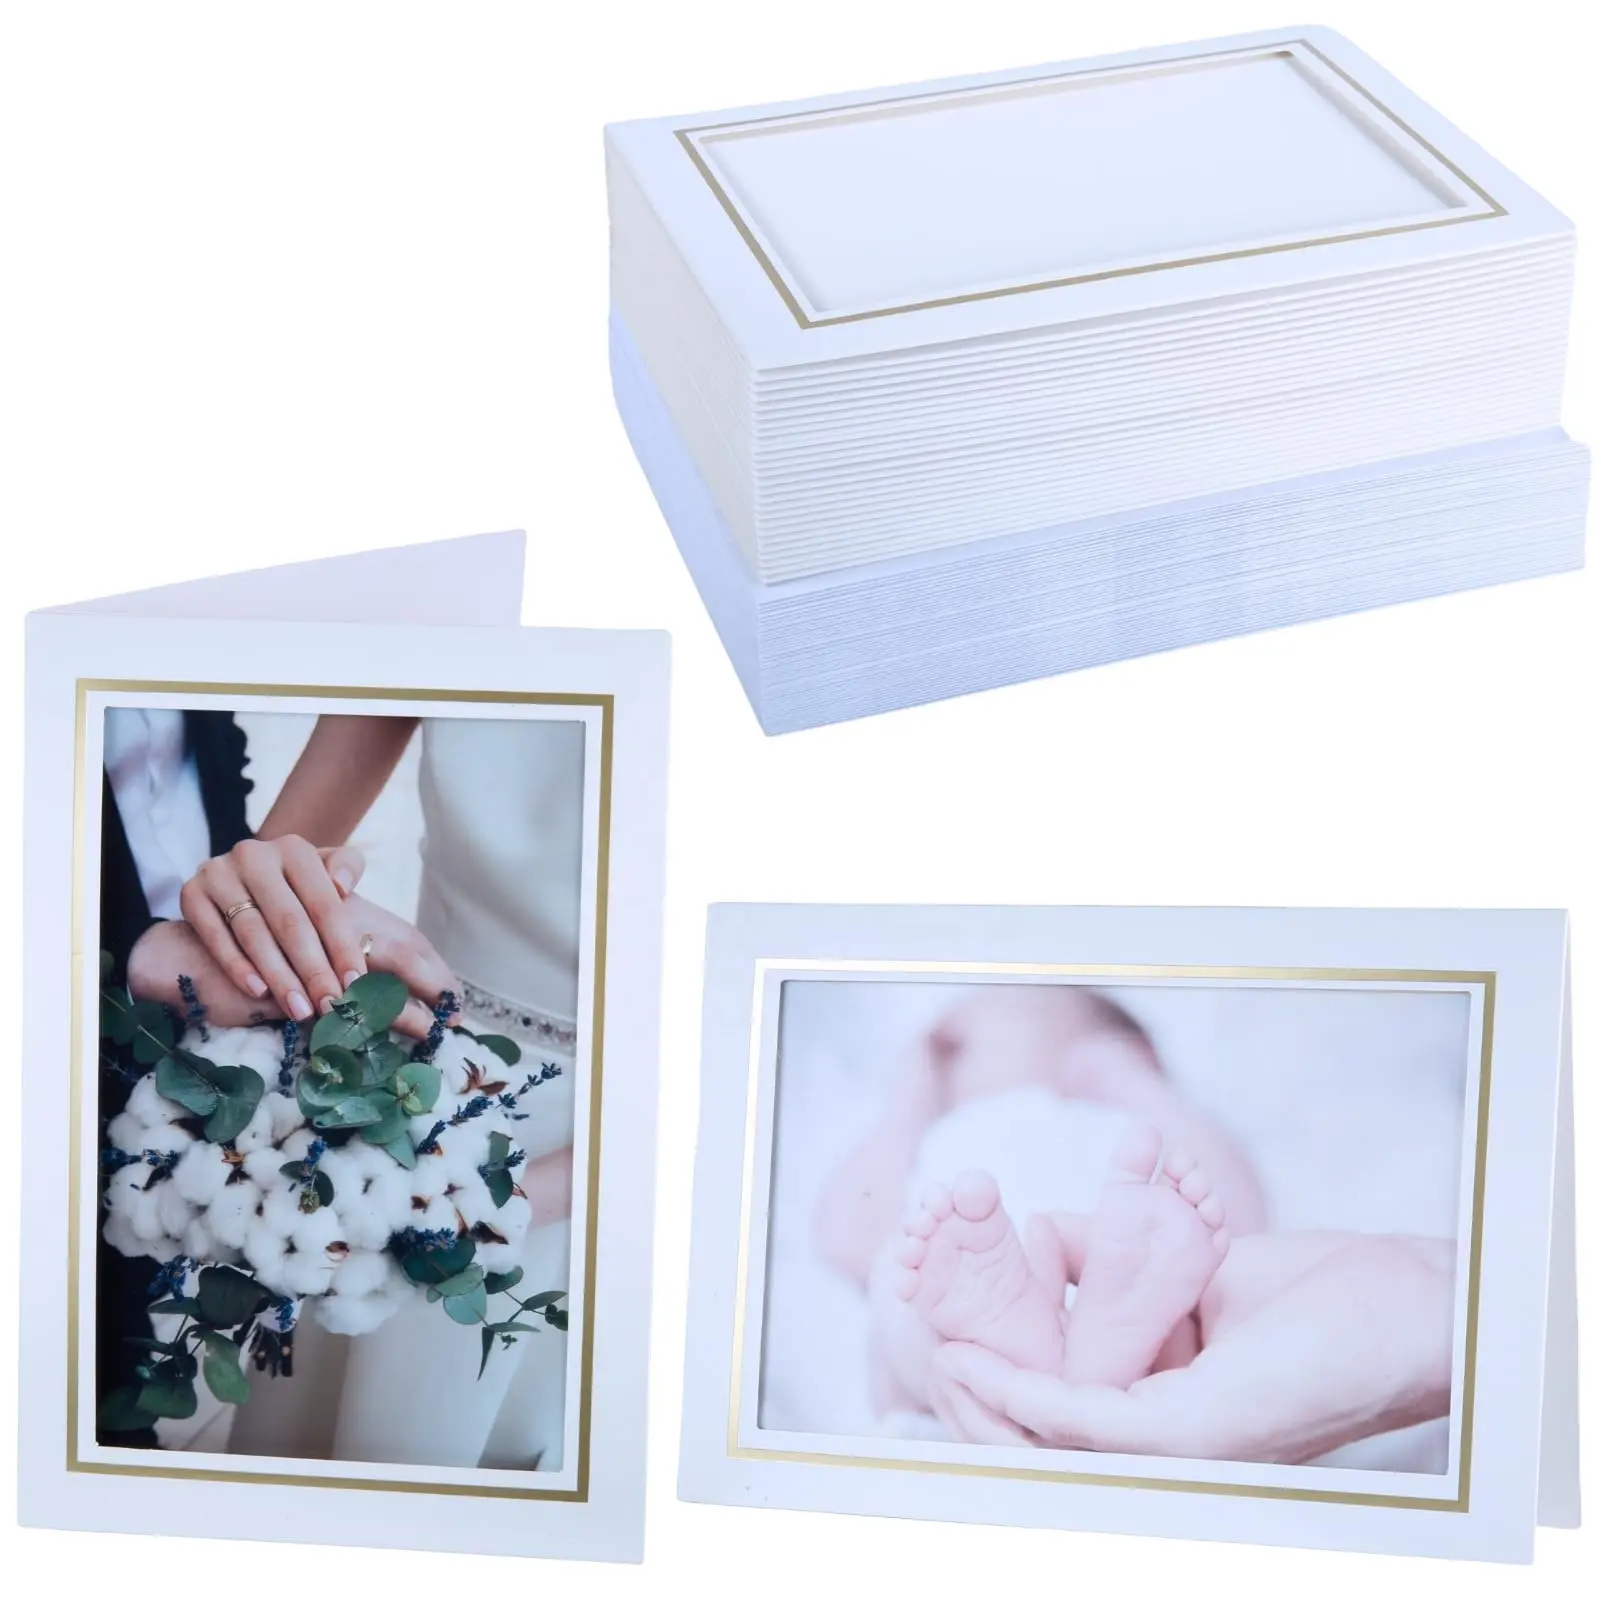 Oem Paper Picture Frame with gold lining Folder for 4*6 cards for wedding,Birthday.Blank photo Insert Note Cards tith envelopes